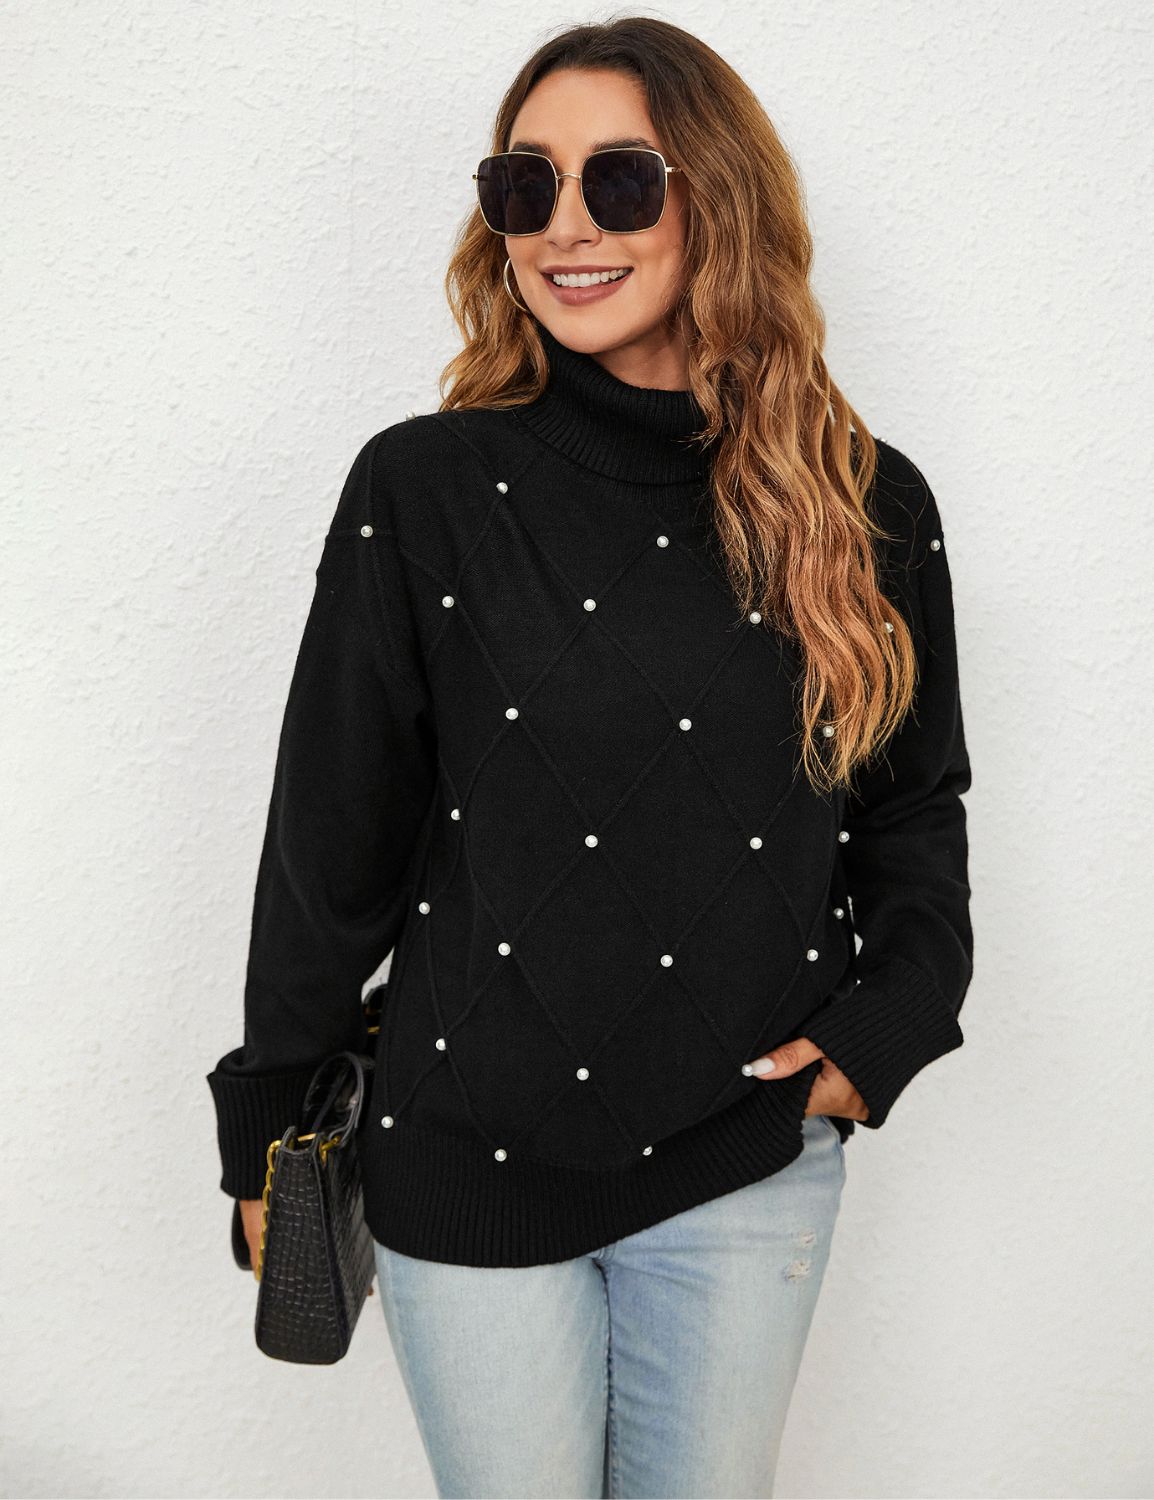 Cozy Turtle Neck Pullover Sweater with Pearls